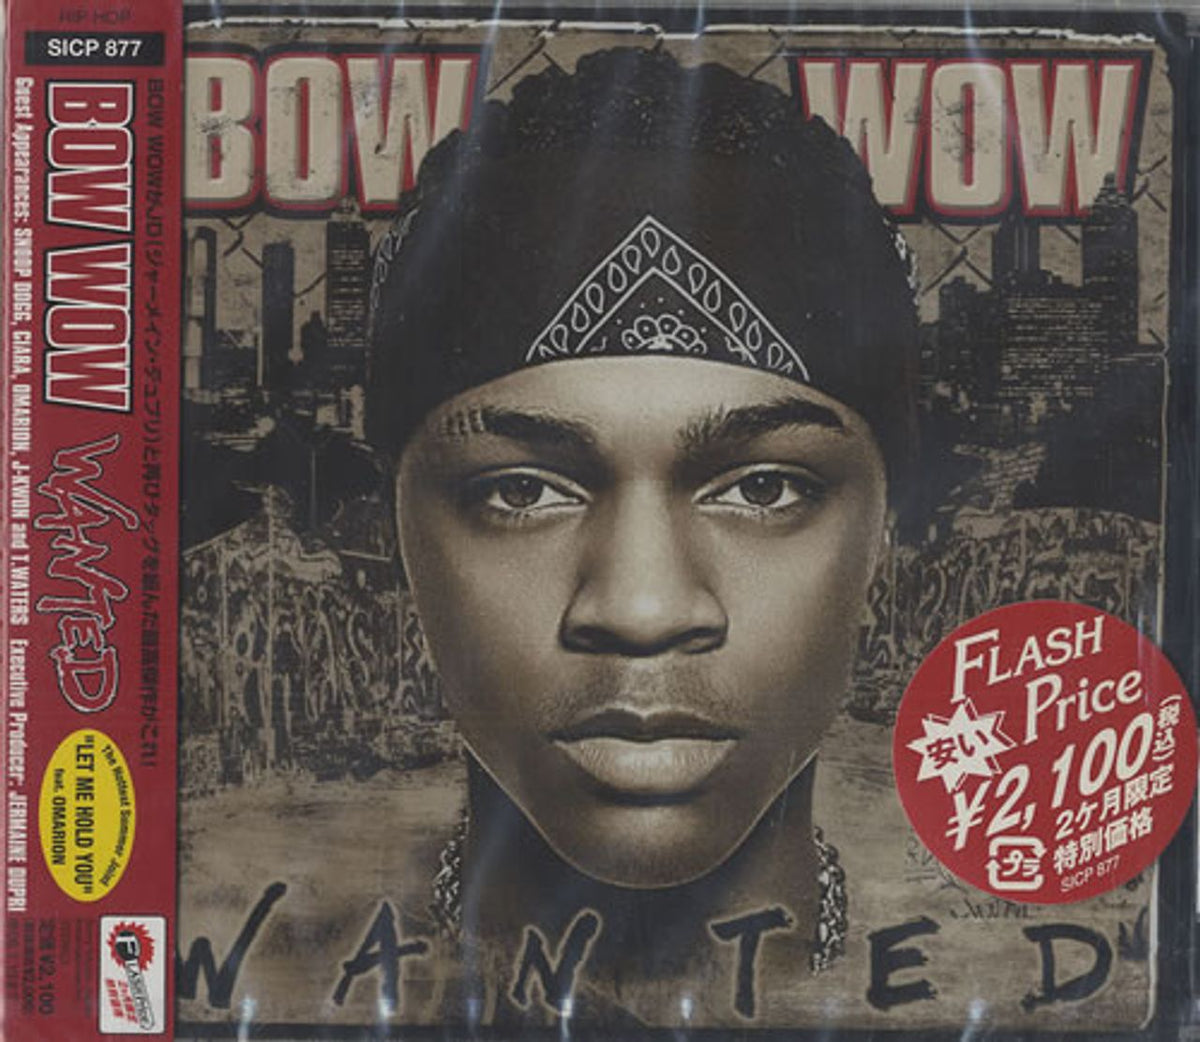 Lil Bow Wow Wanted Japanese Promo CD album —